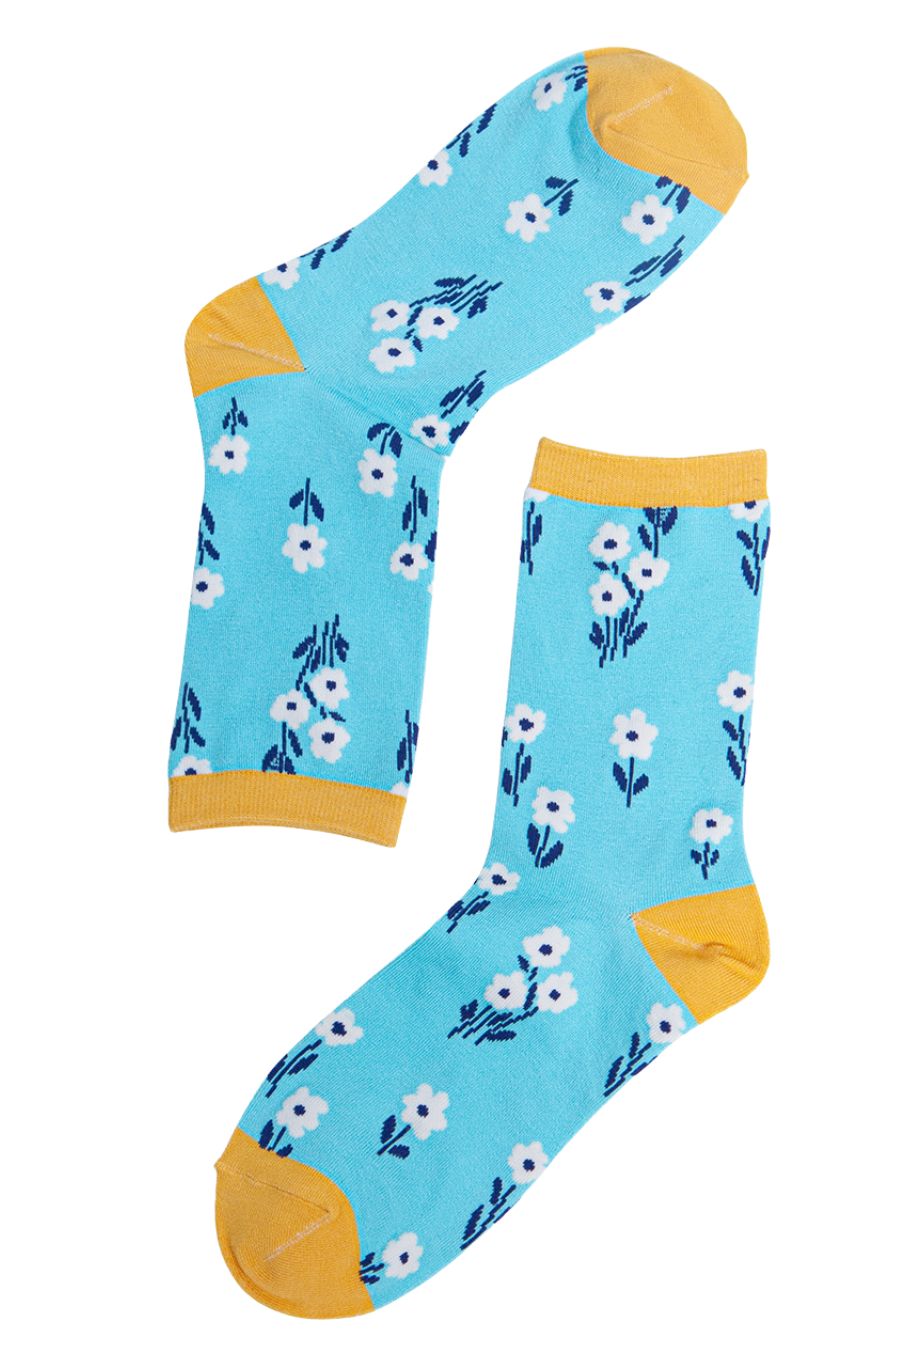 blue, yellow ankle socks with white flowers